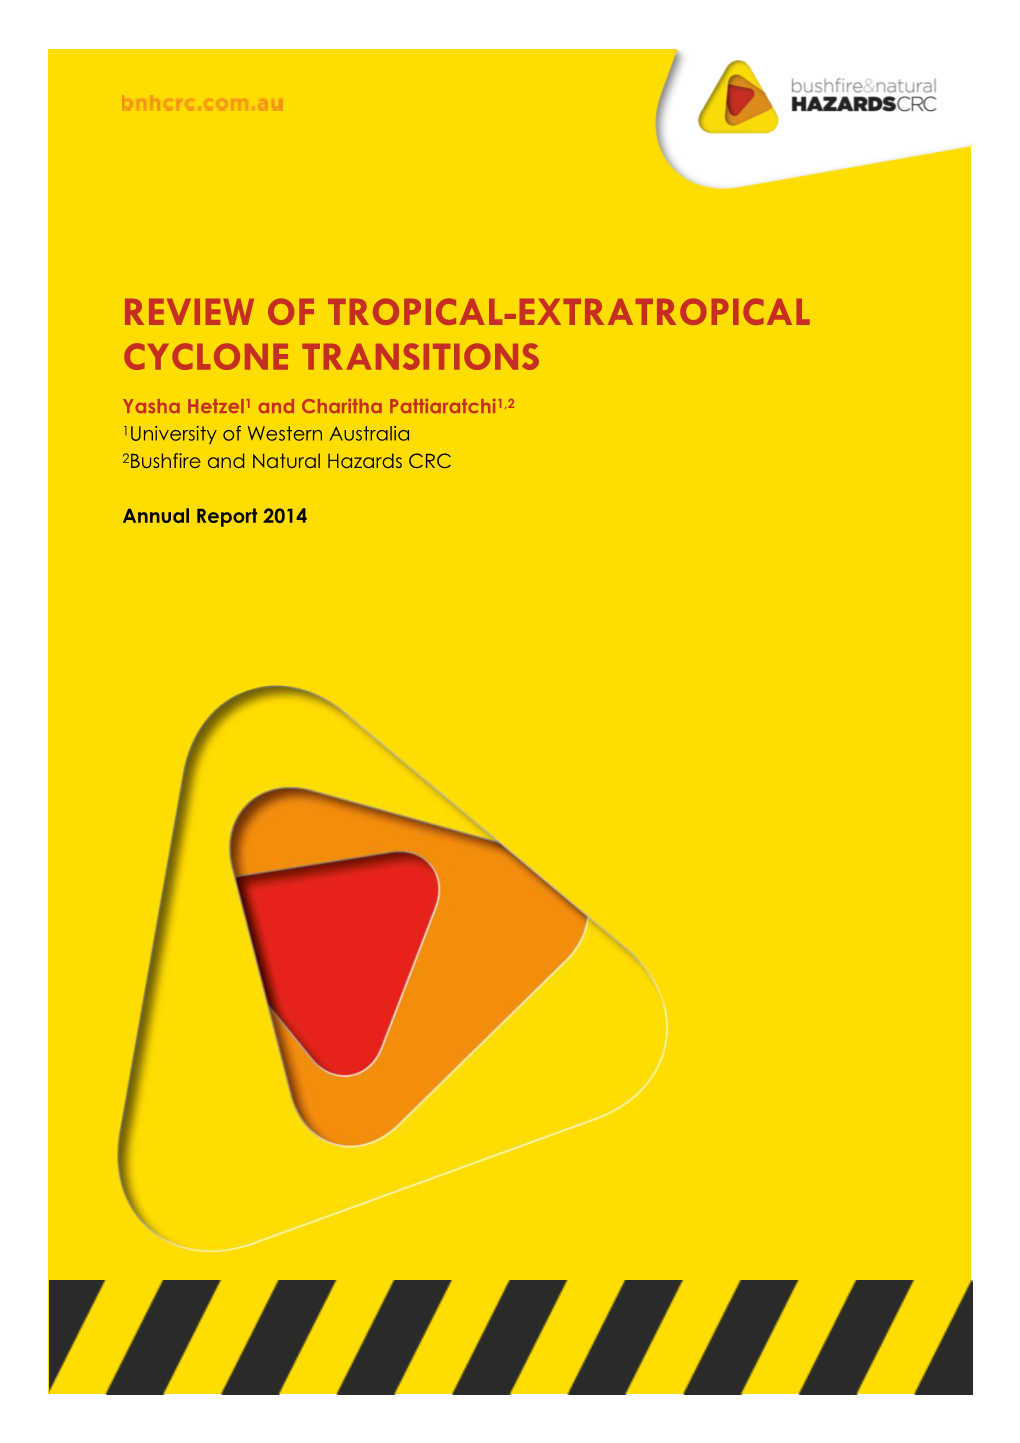 Review of Tropical-Extratropical Cyclone Transitions